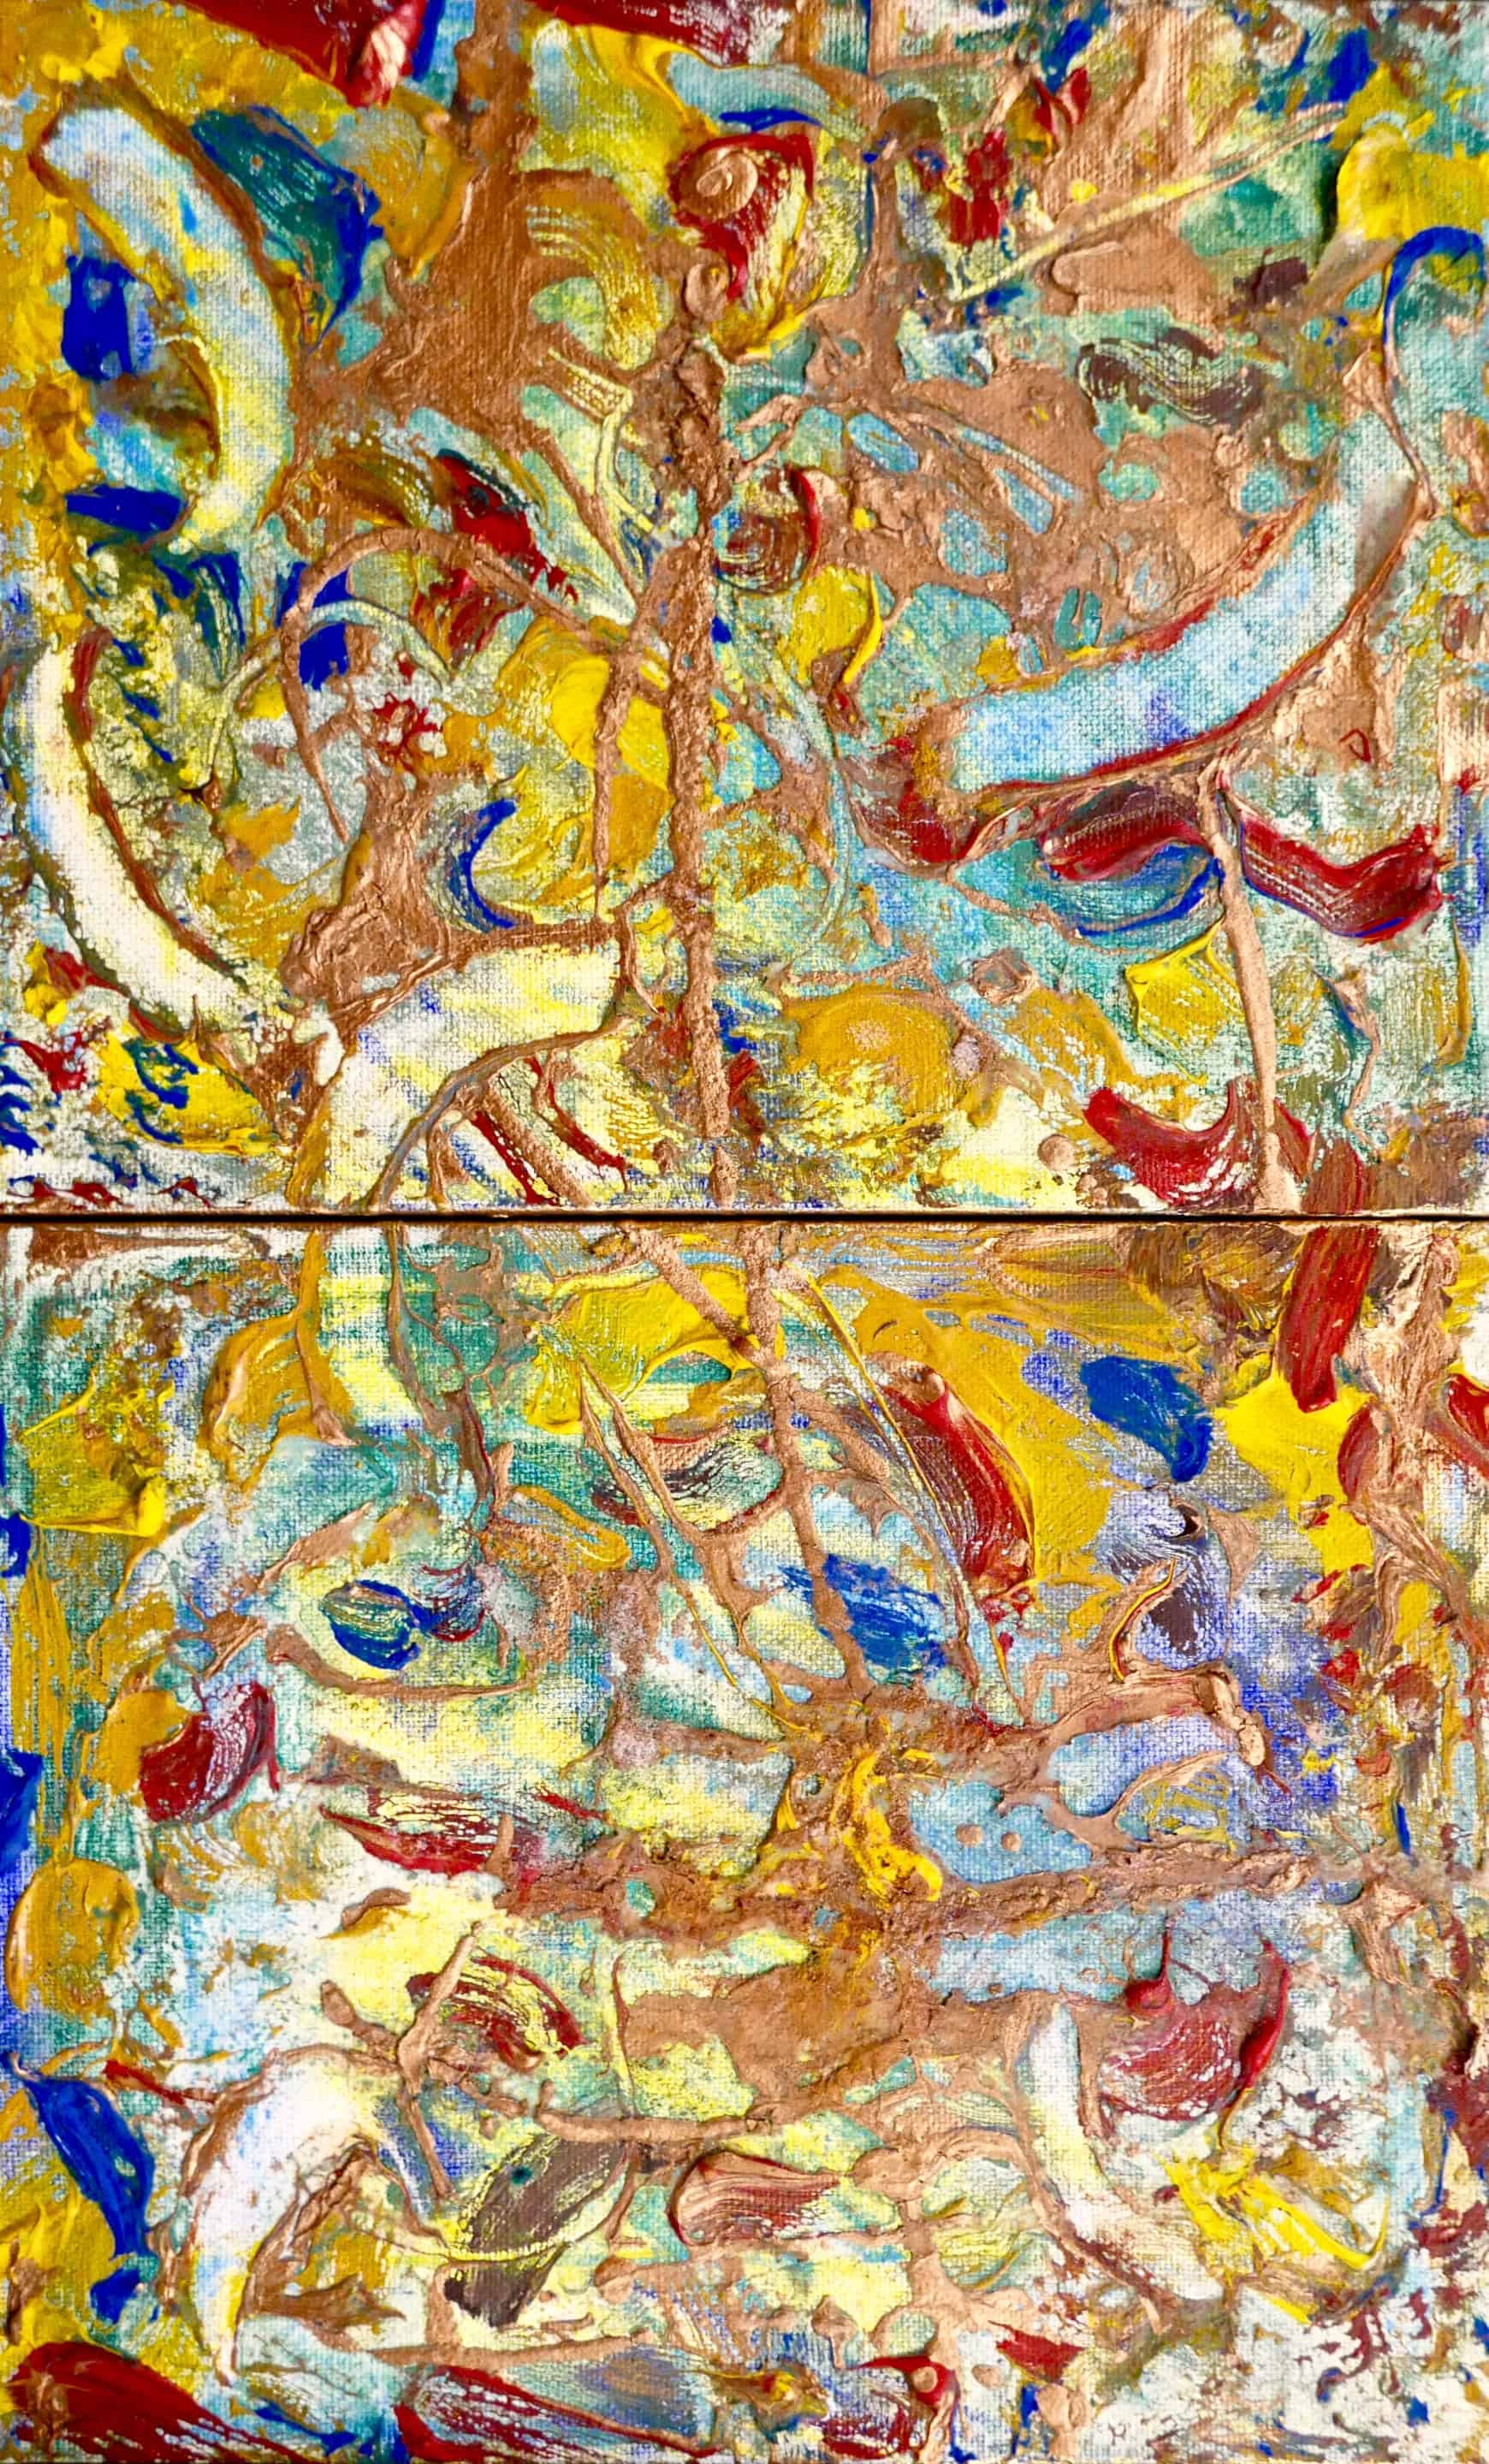 Stained Glass (diptych) August 2020 Oil and mixed media on canvas (unframed)